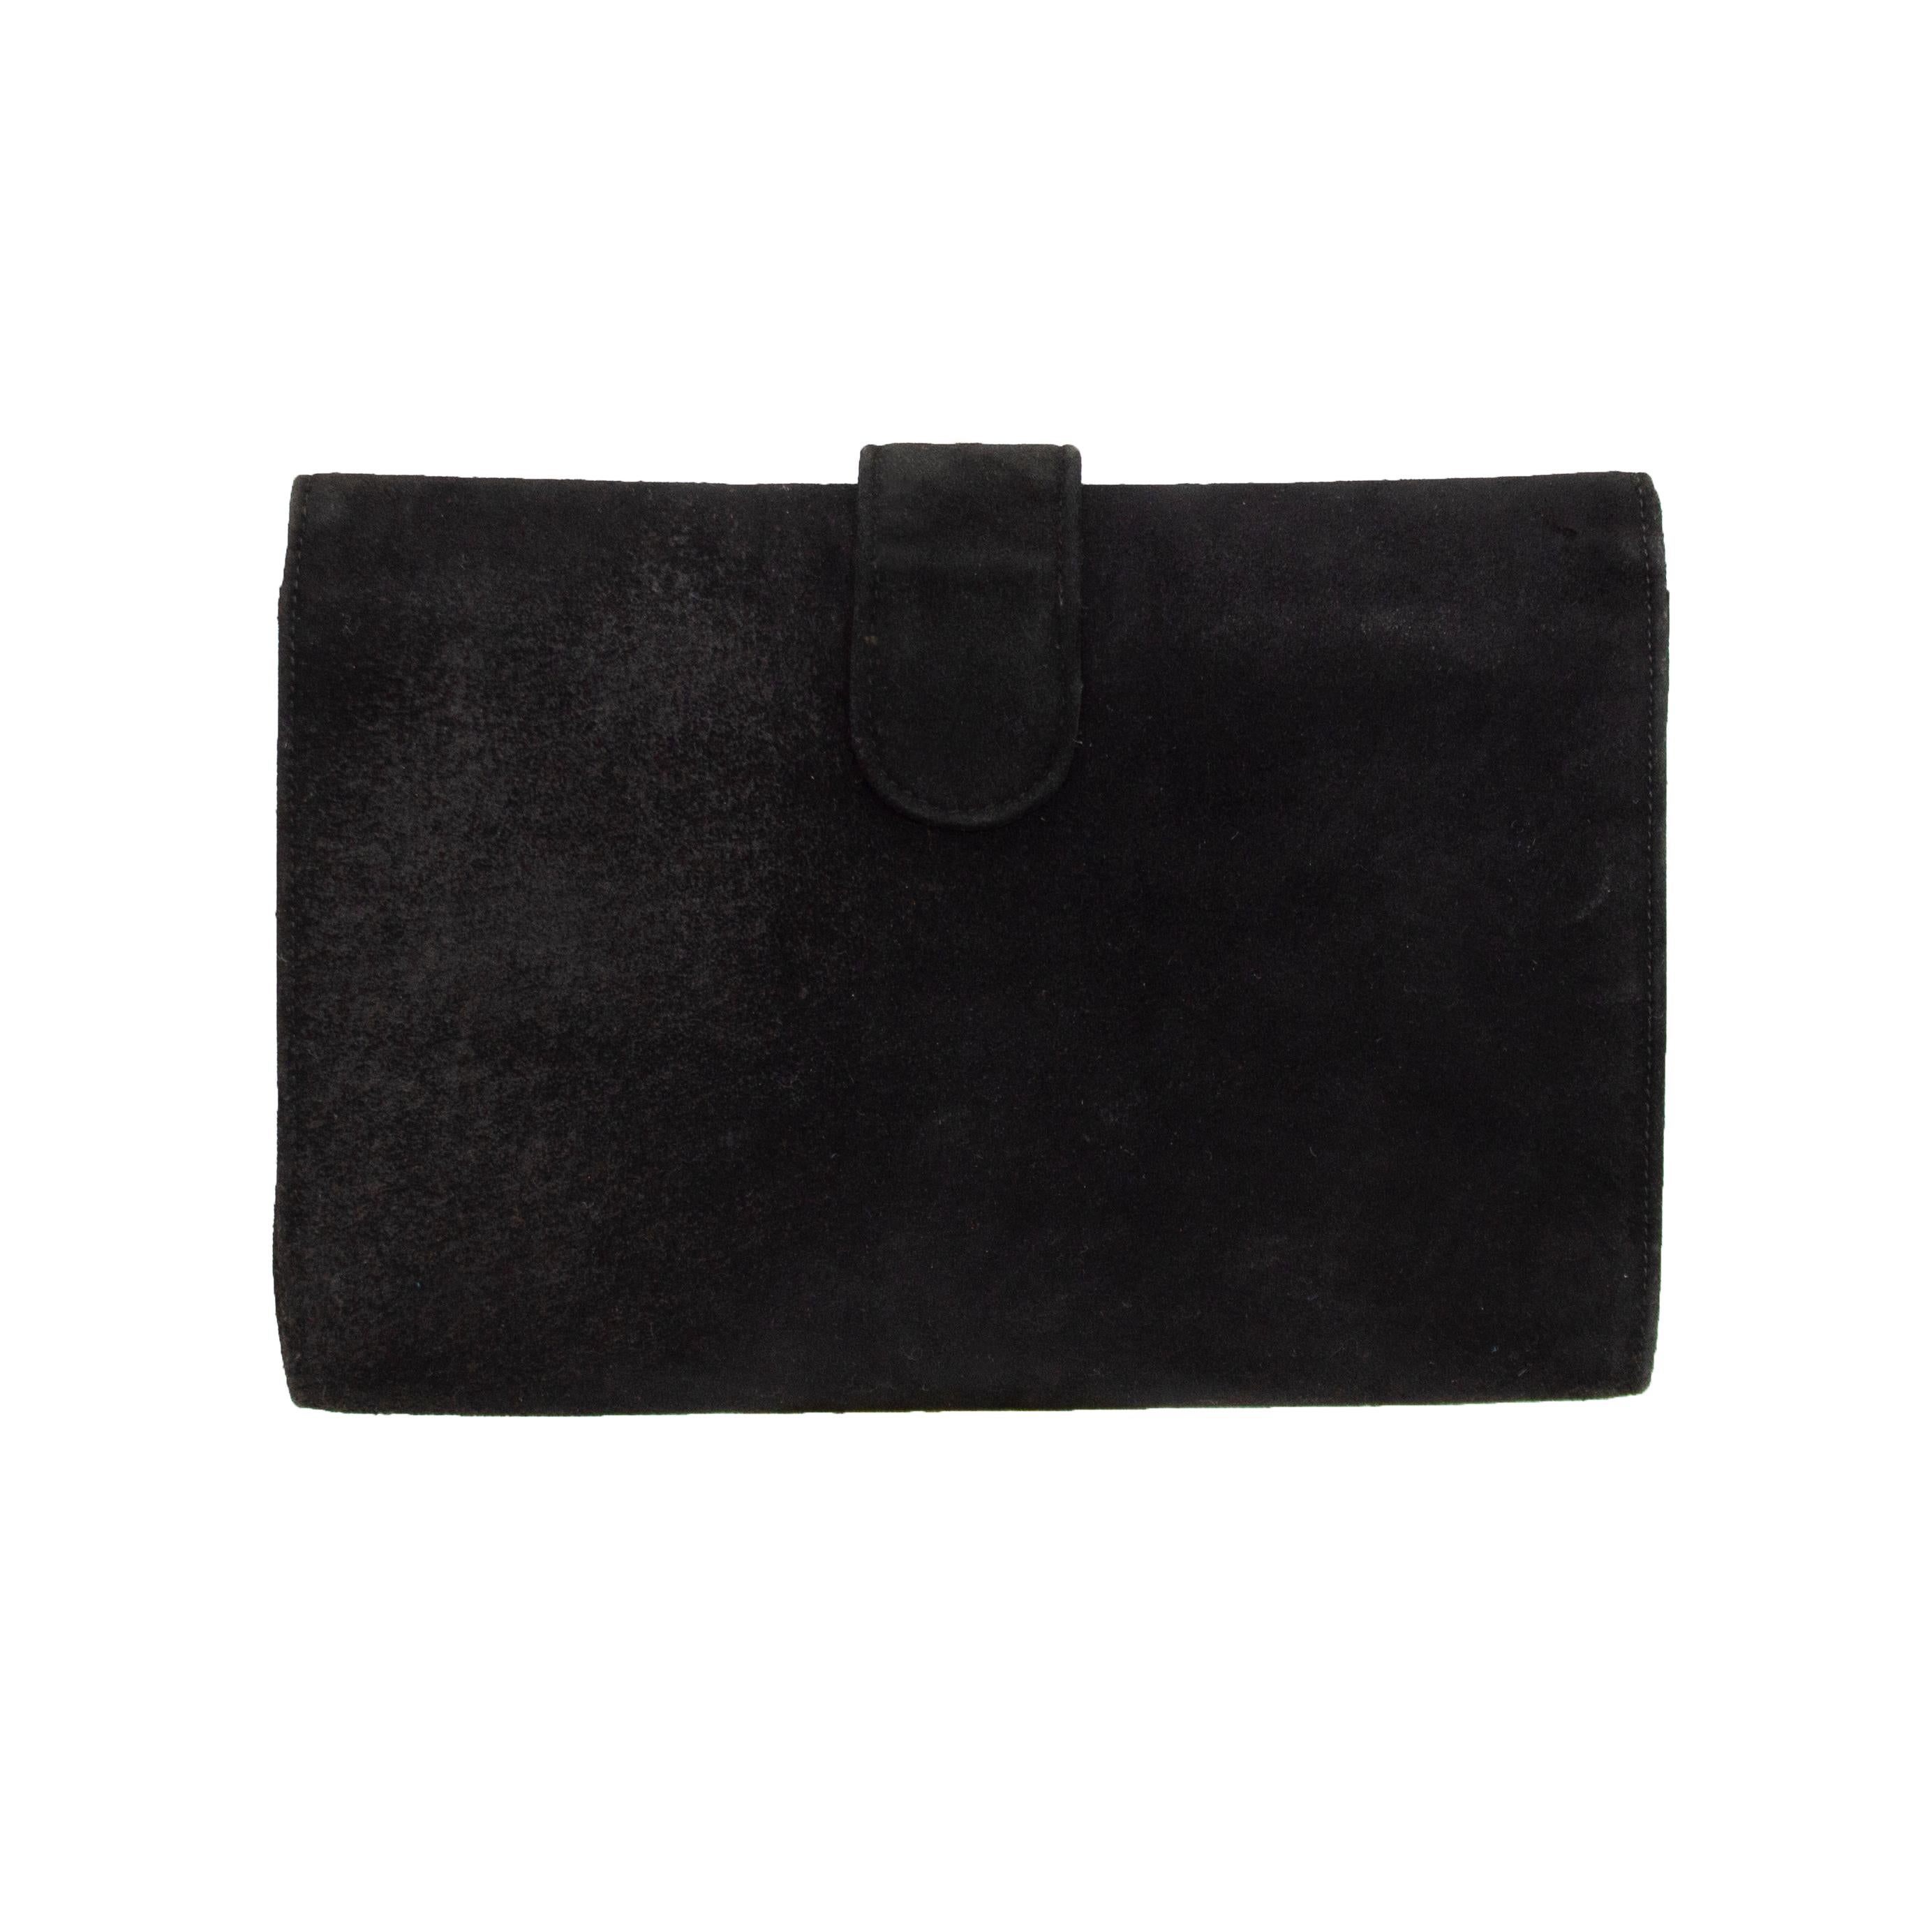 1970s Gucci Black Suede Clutch  In Good Condition For Sale In Toronto, Ontario